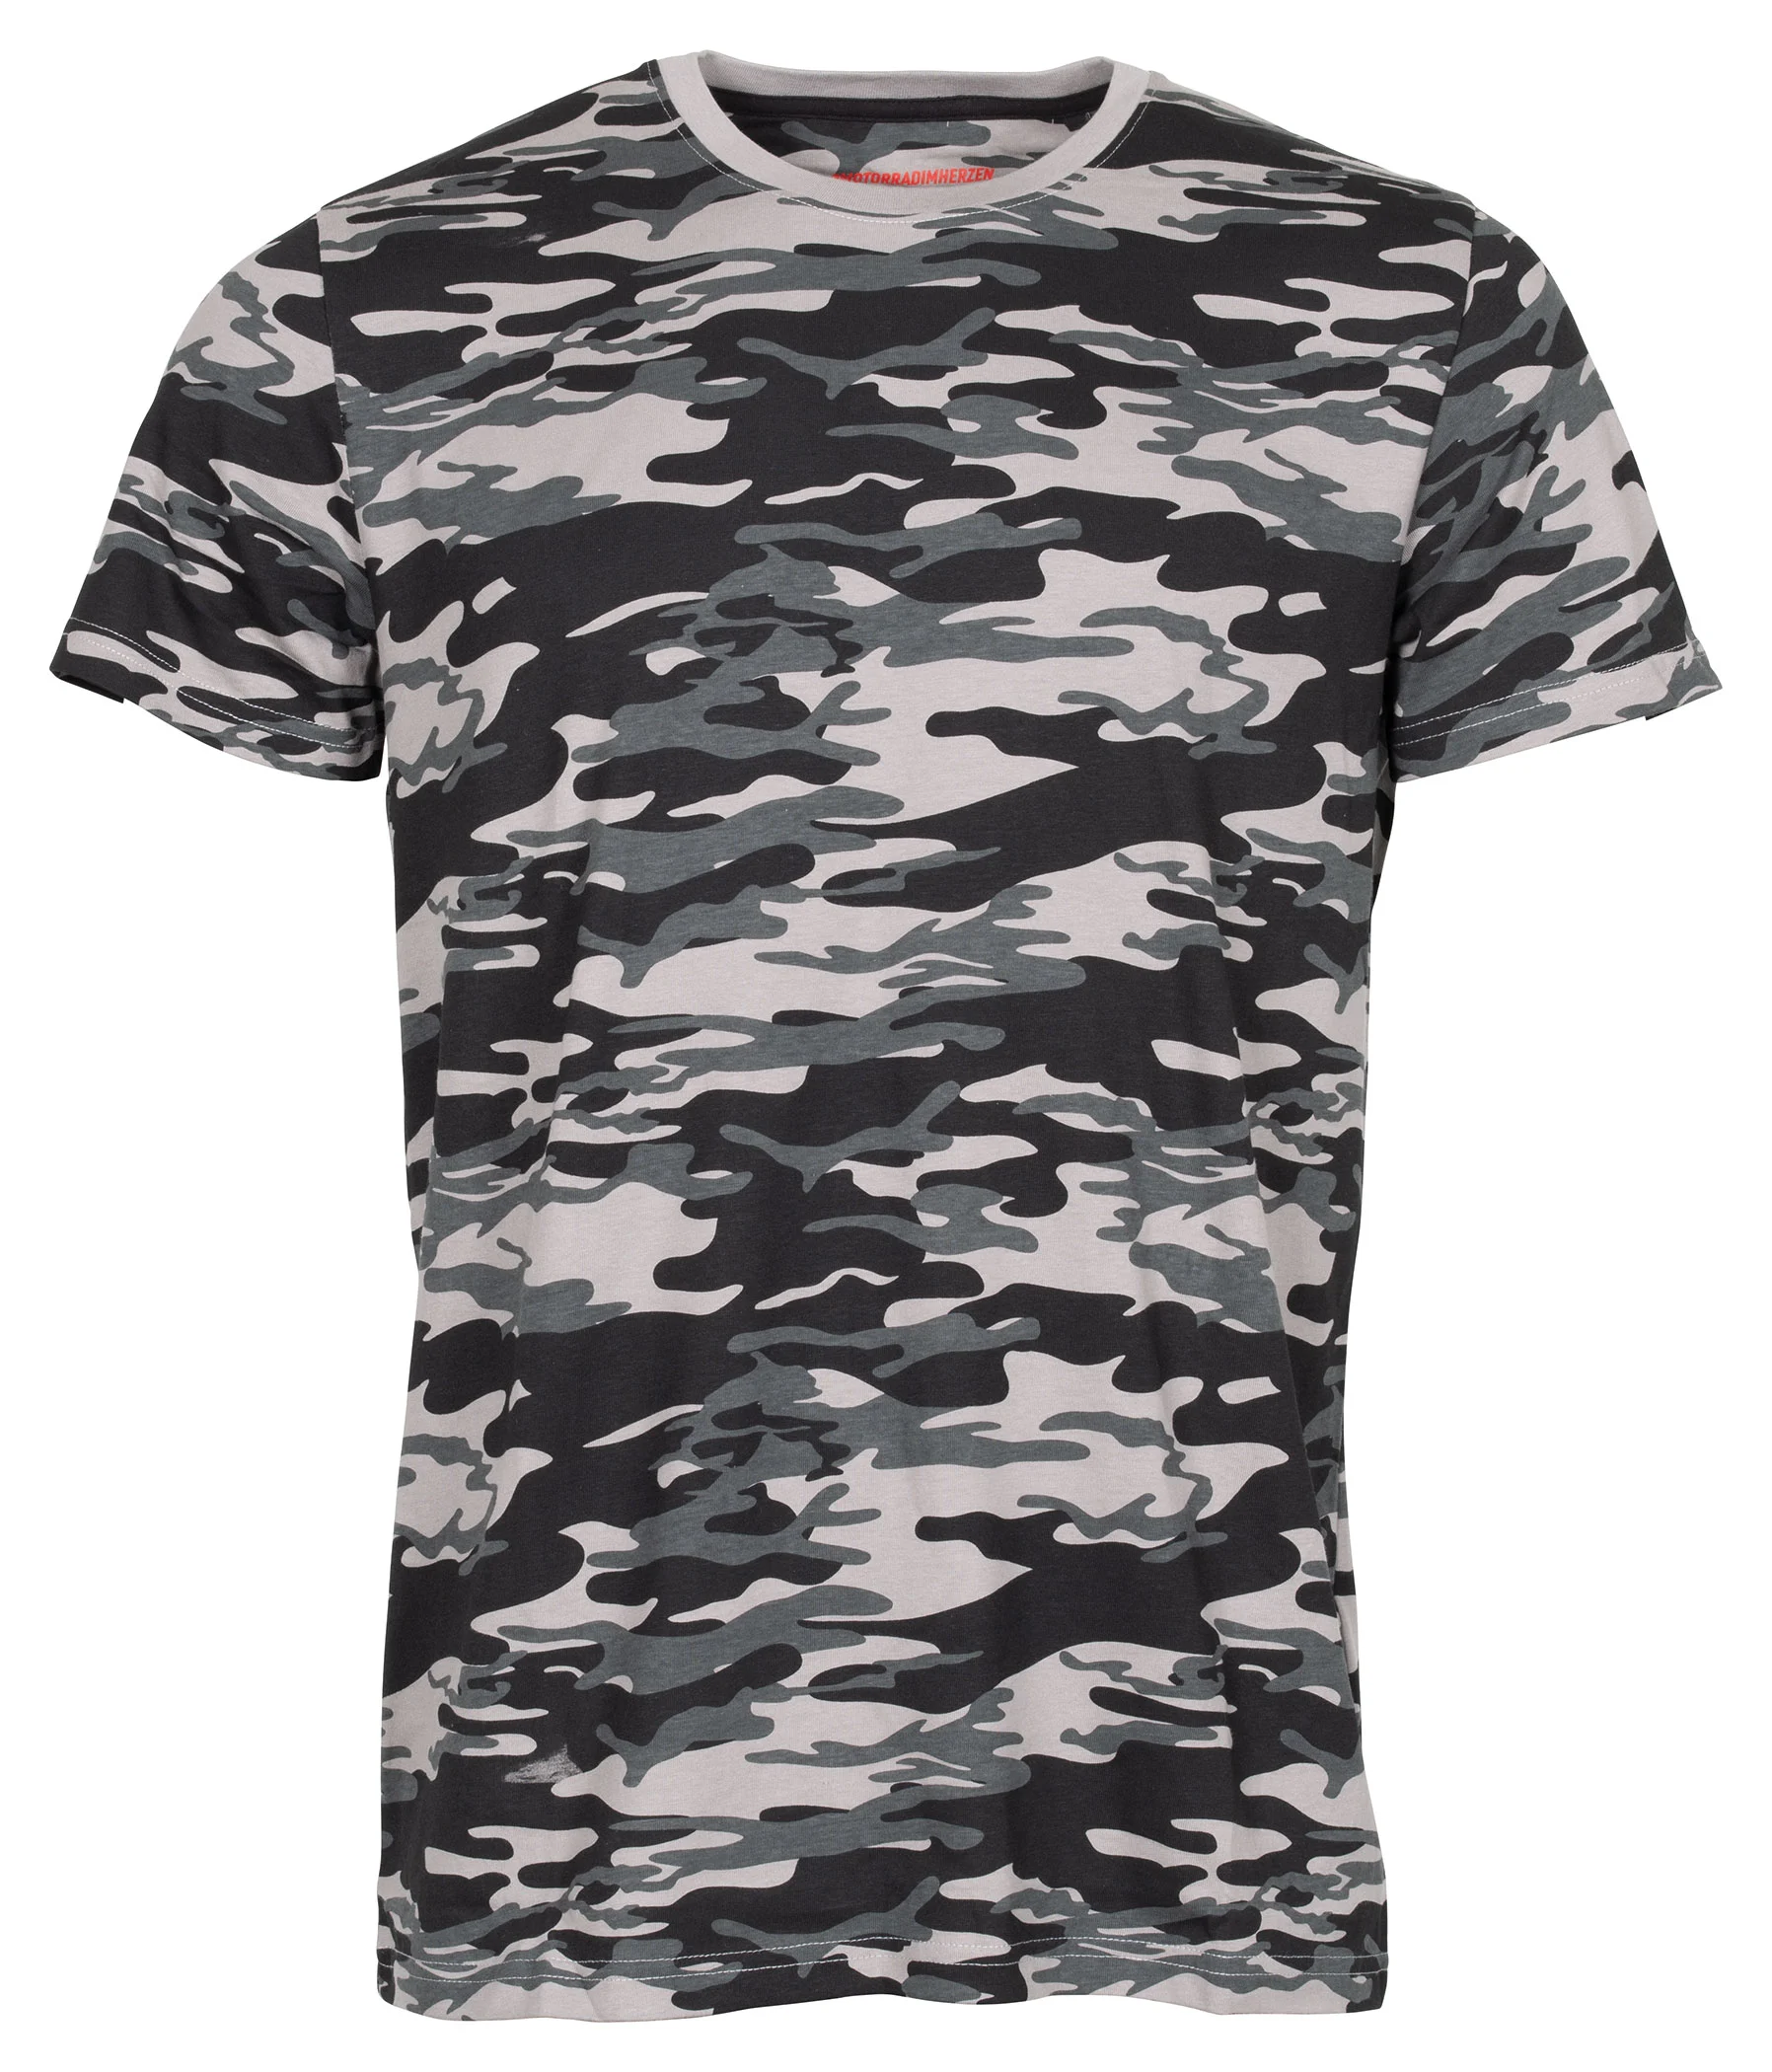 LOUIS T-SHIRT CAMOUFLAGE